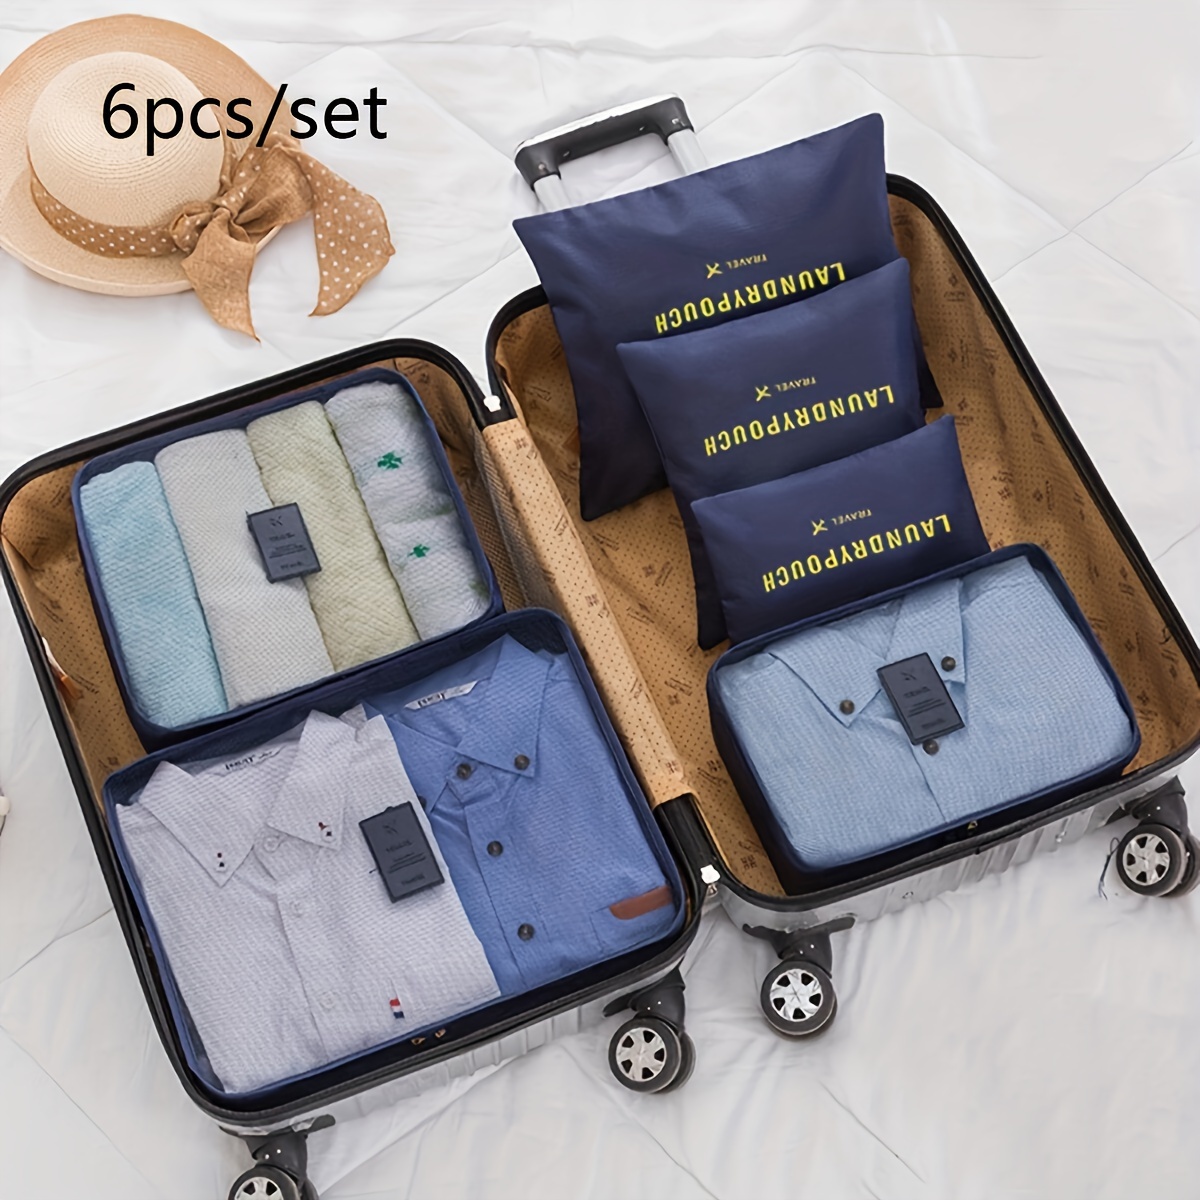 7pcs Travel Storage Bag Set, Business Trip Travel Underwear Organizer Bag,  Luggage Clothes Packing Cubes, Cosmetic Sub-packing Bag With Shoes Bag